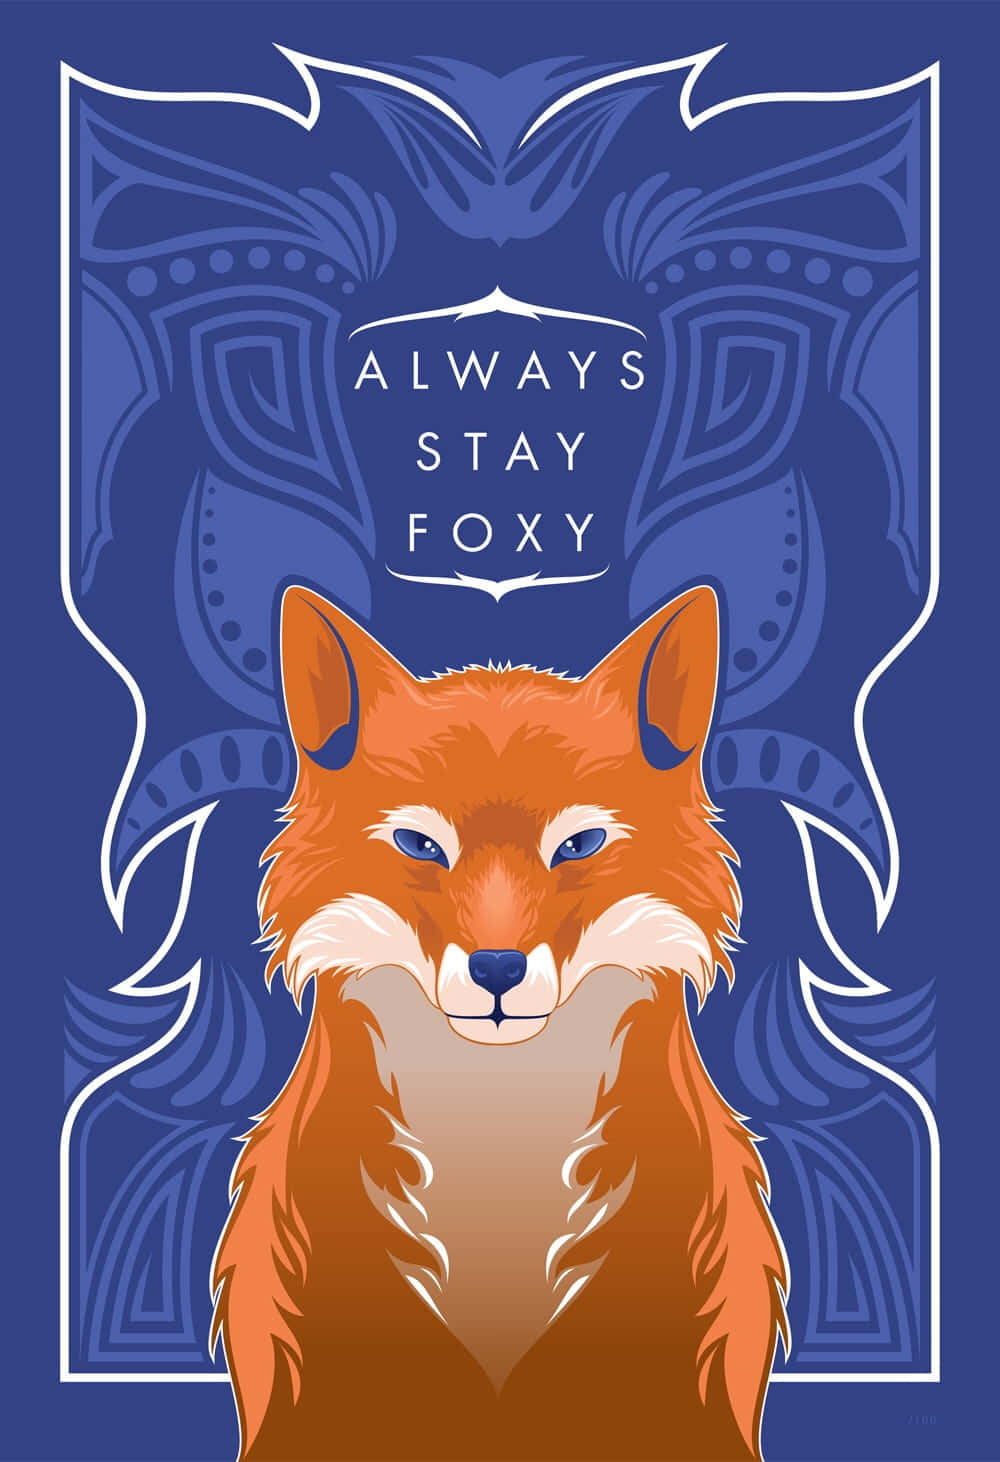 Enjoy the company of this foxy friend